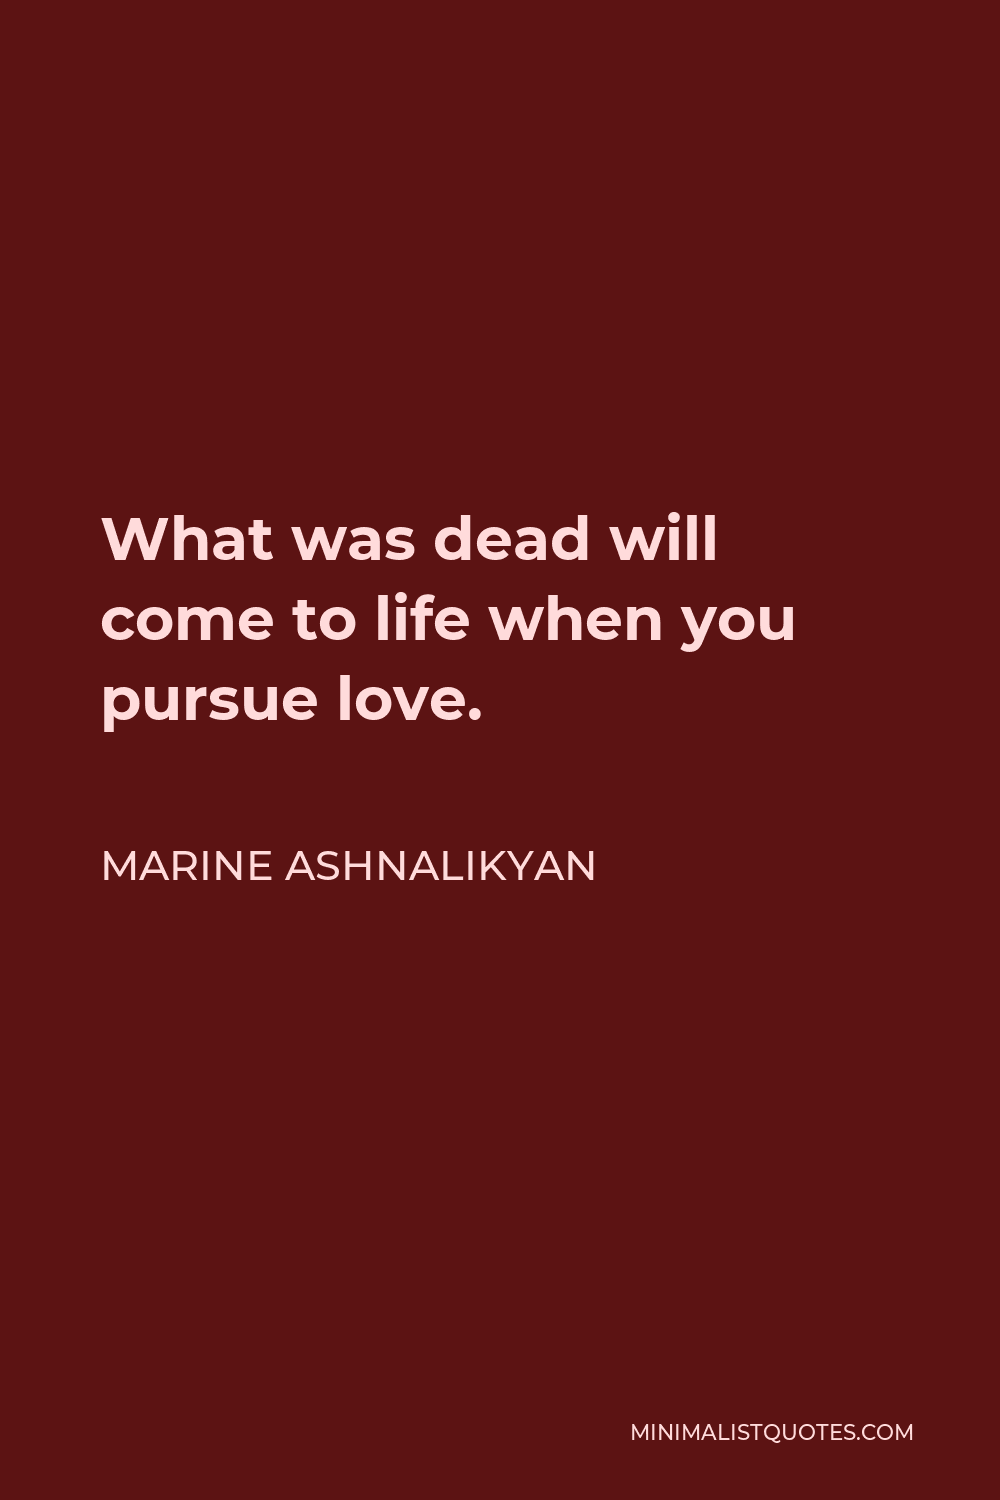 Marine Ashnalikyan Quote - What was dead will come to life when you pursue love.